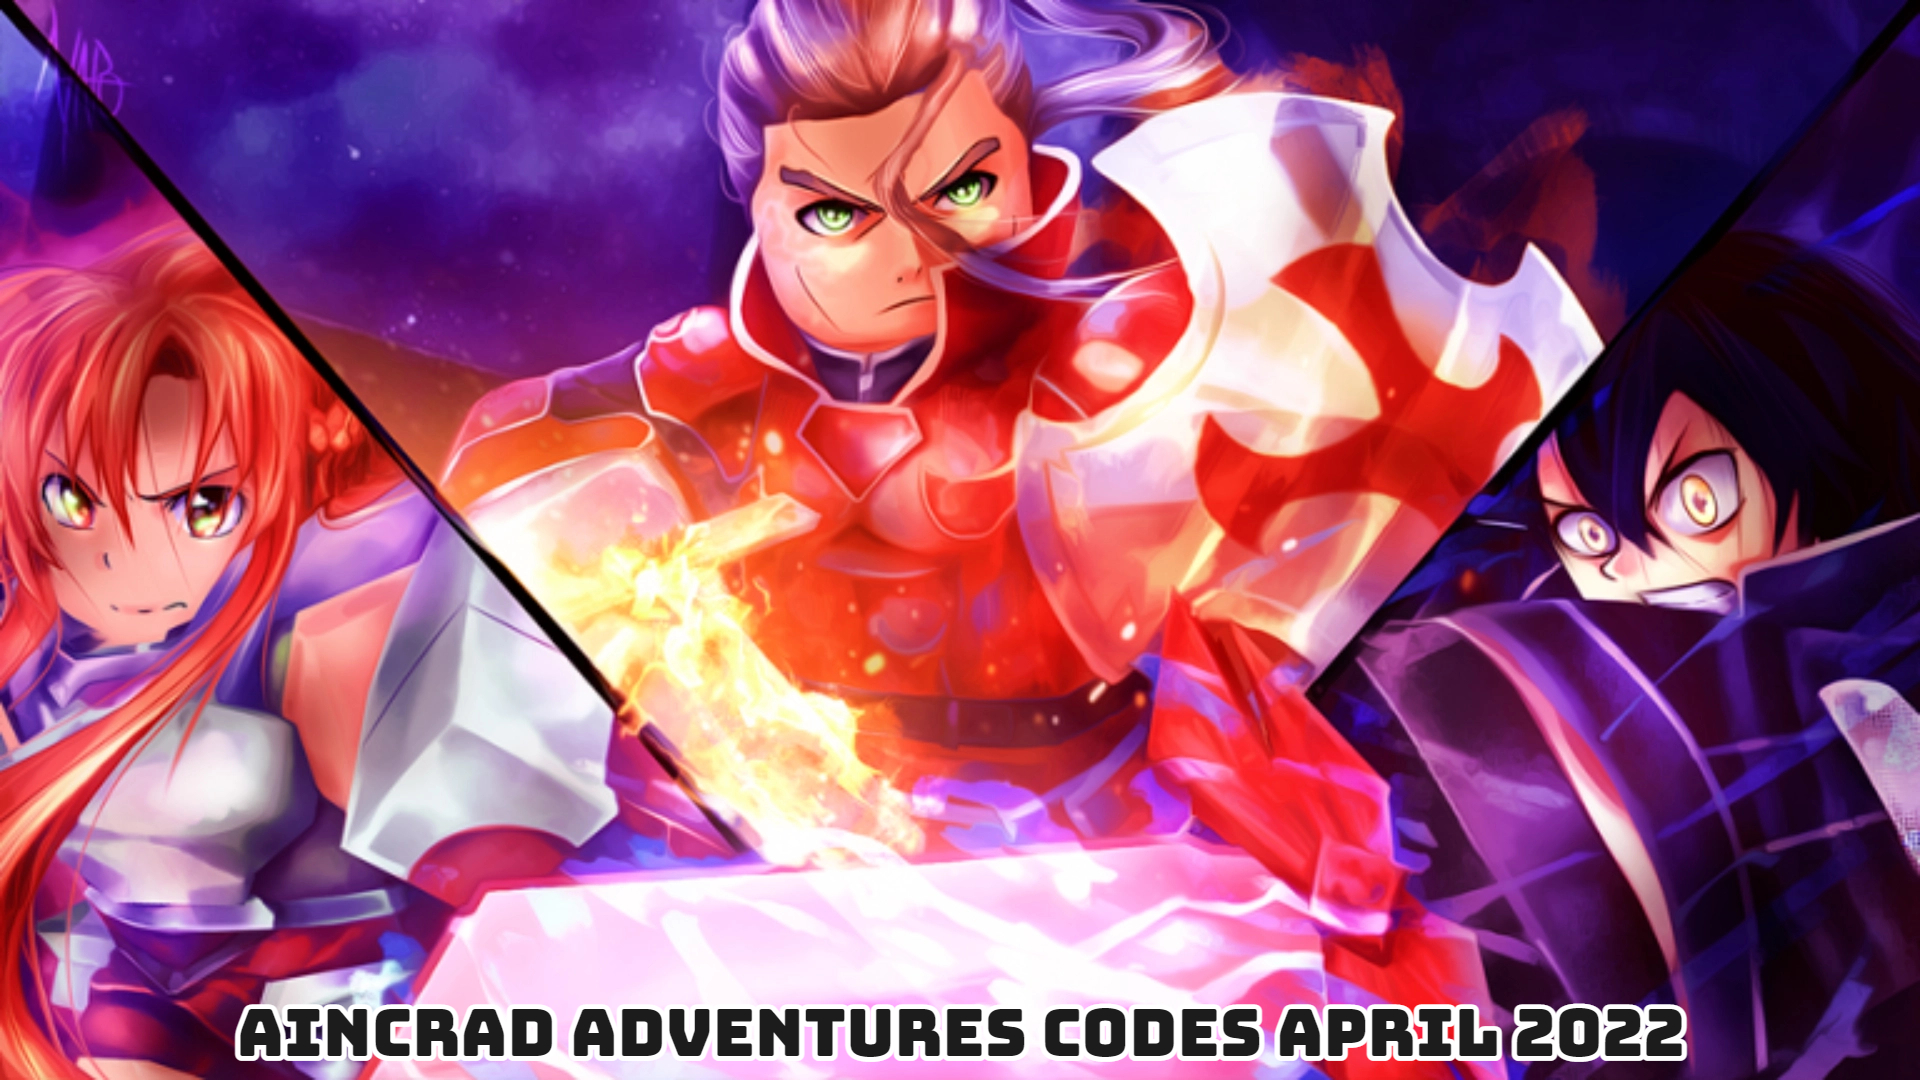 You are currently viewing Aincrad Adventures Codes Today 2 April 2022